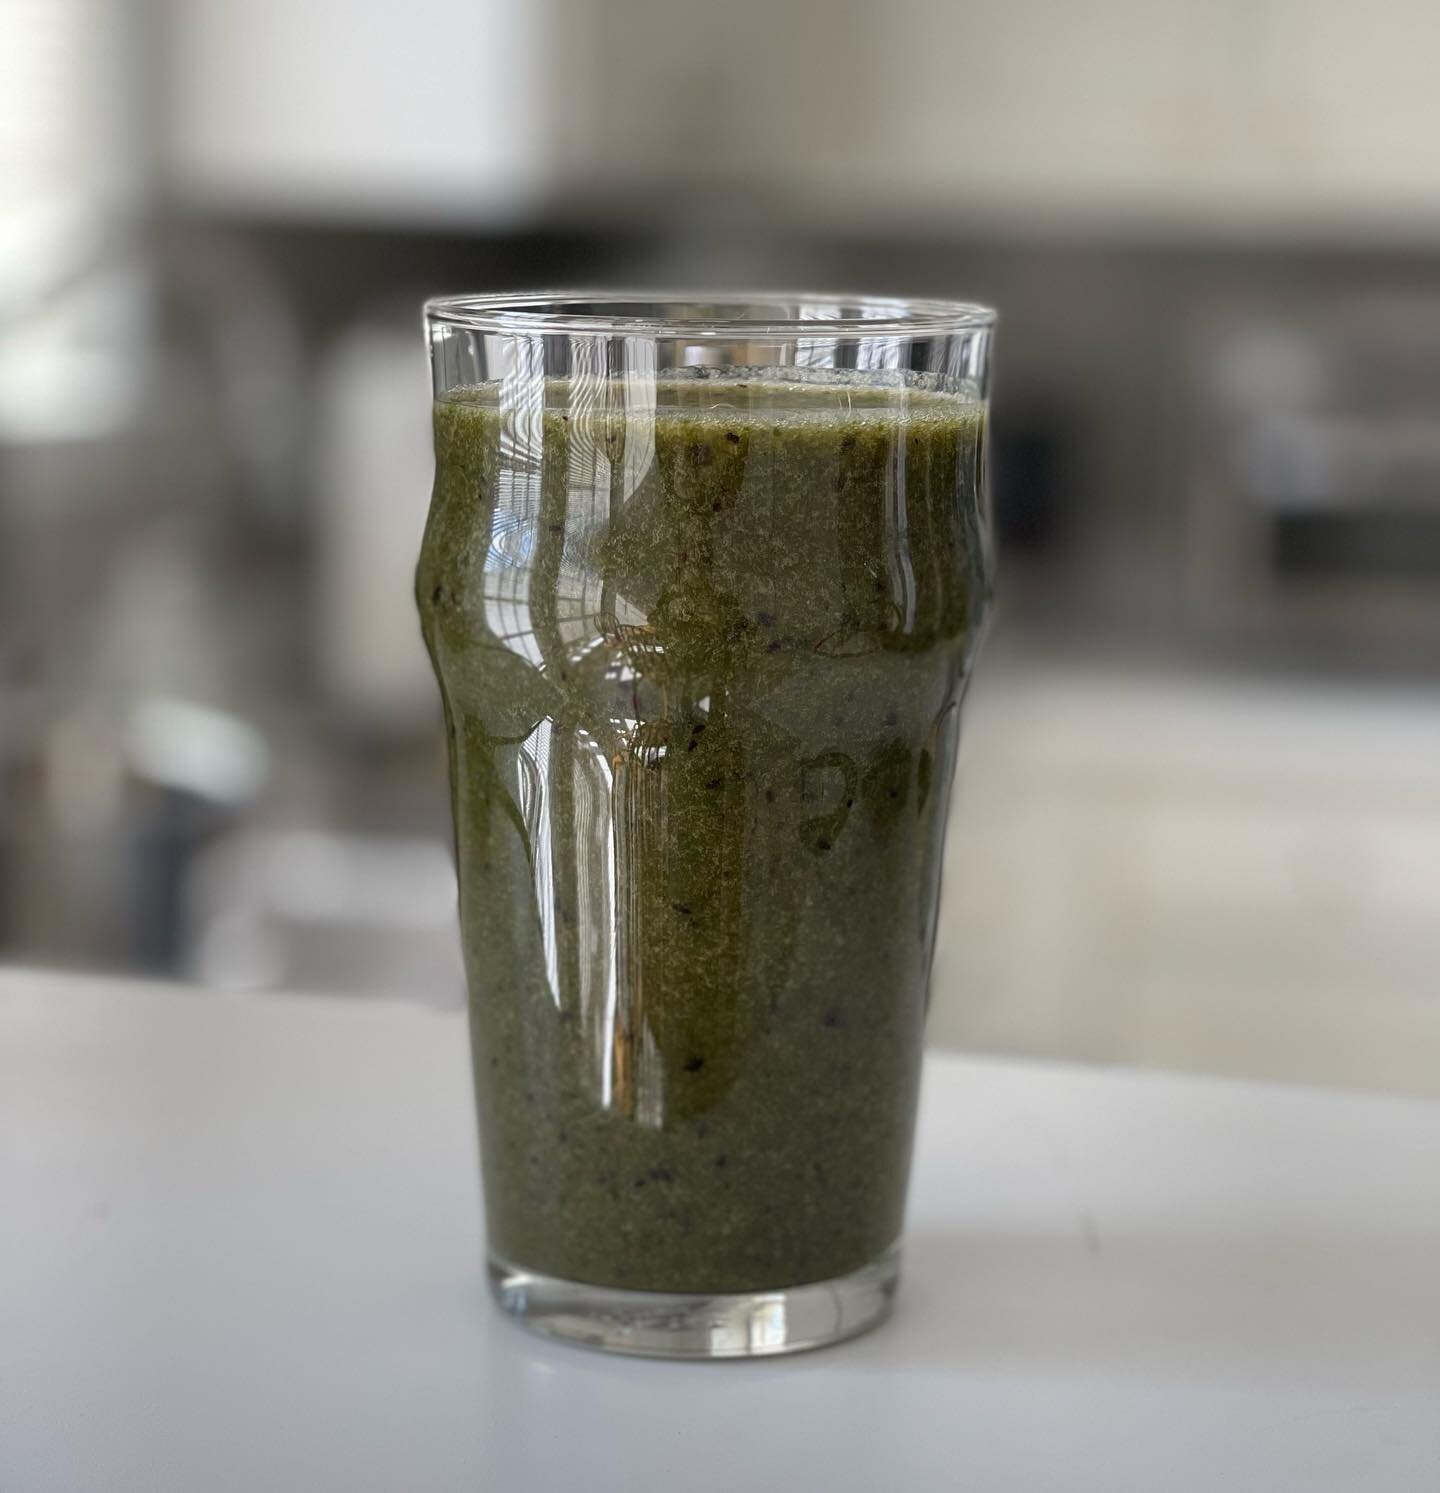 For my birthday this year I gave up meat, seafood, dairy, eggs, oil, processed foods and alcohol. I switched to a whole food plant-based diet and it feels great!

My favorite craft beer glass of yesteryear is now my daily green smoothie glass of toda